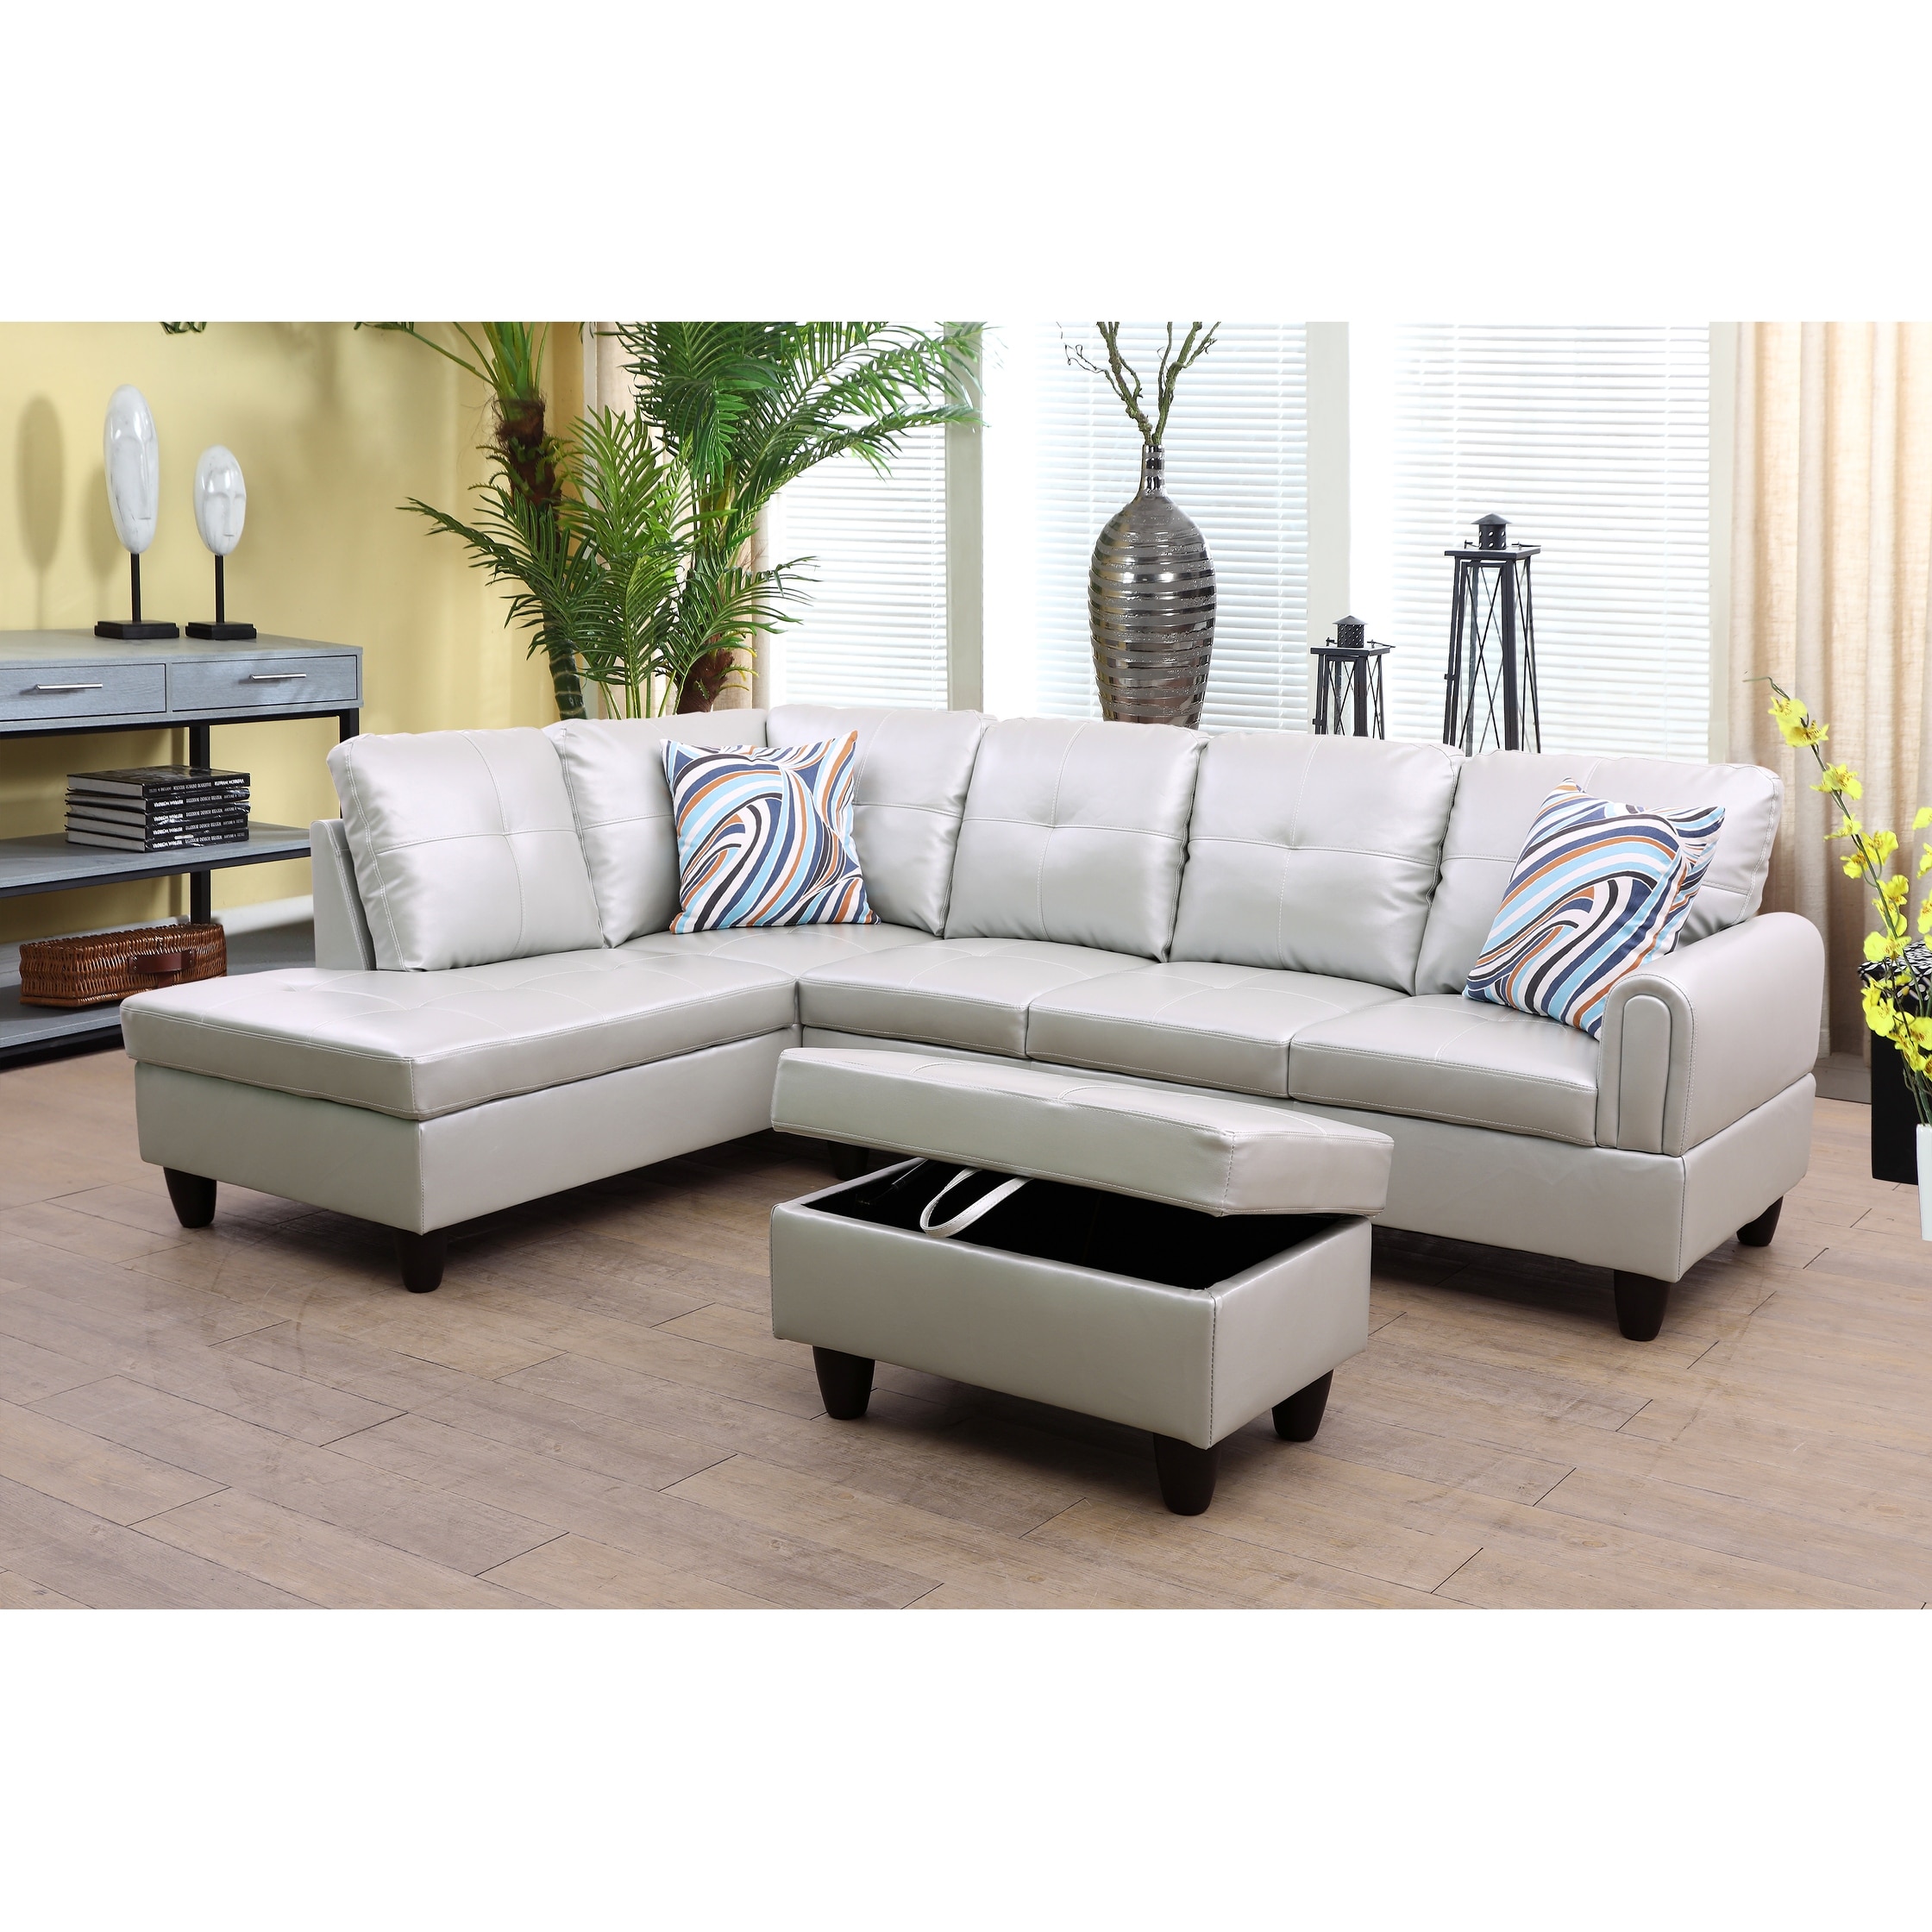 Henryleo 3-Pieces Sectional Sofa Set,Powder,Faux Leather(09728A)